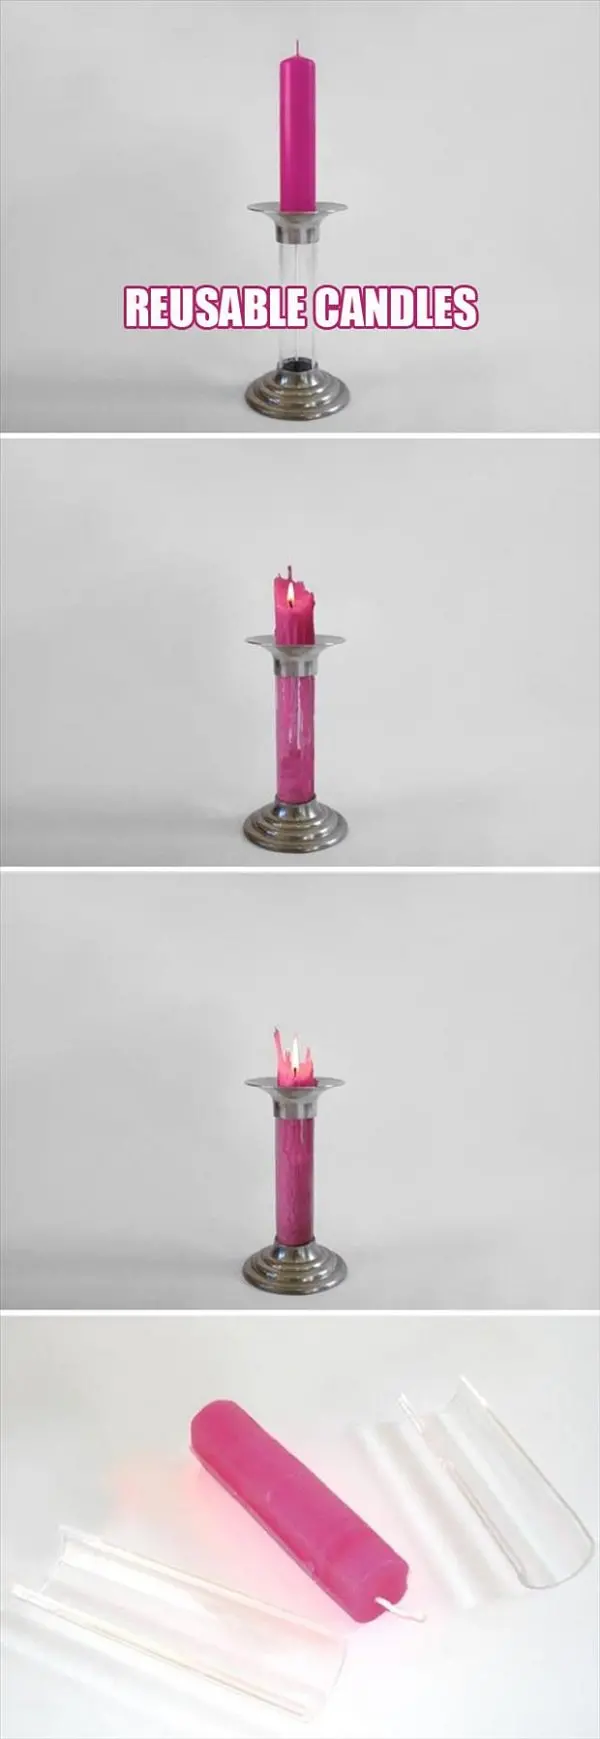 reusable candle